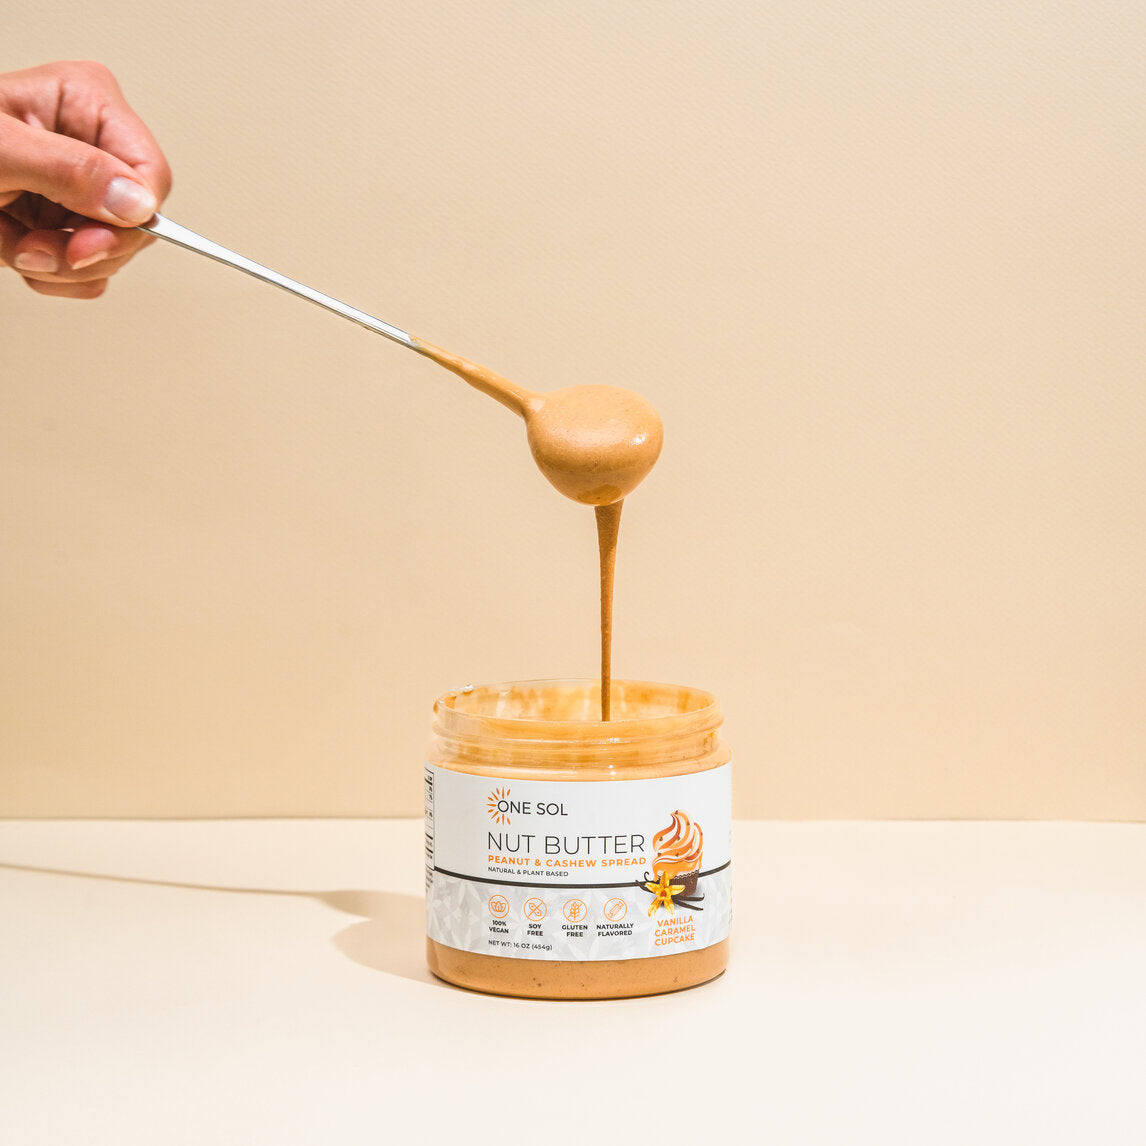 One Sol Nut Butter